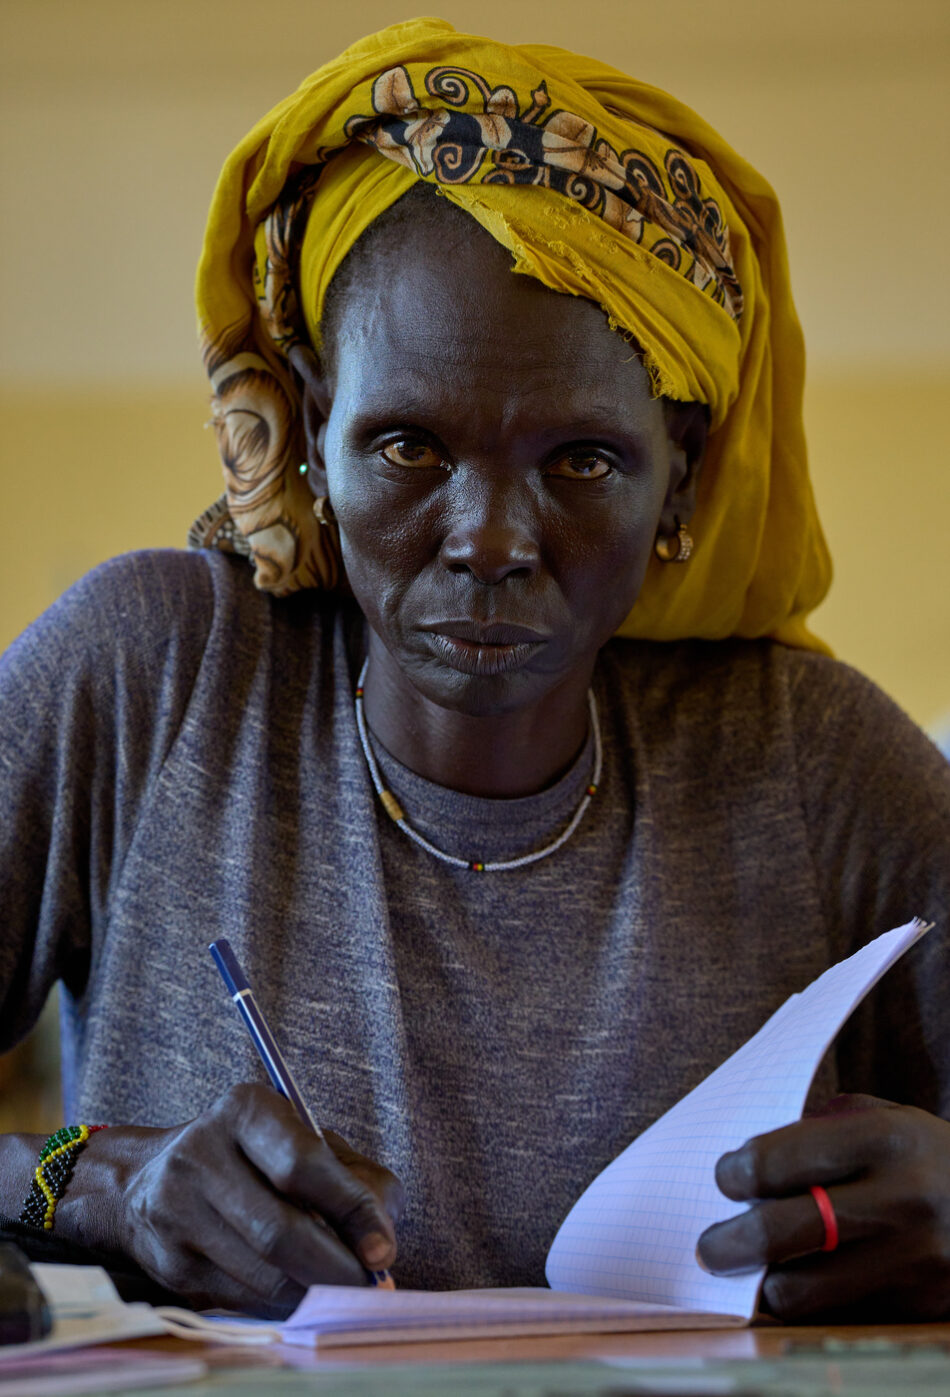 Mary Aping Ghor participates in an adult literacy class at the Loreto Primary School in Rumbek, South Sudan.